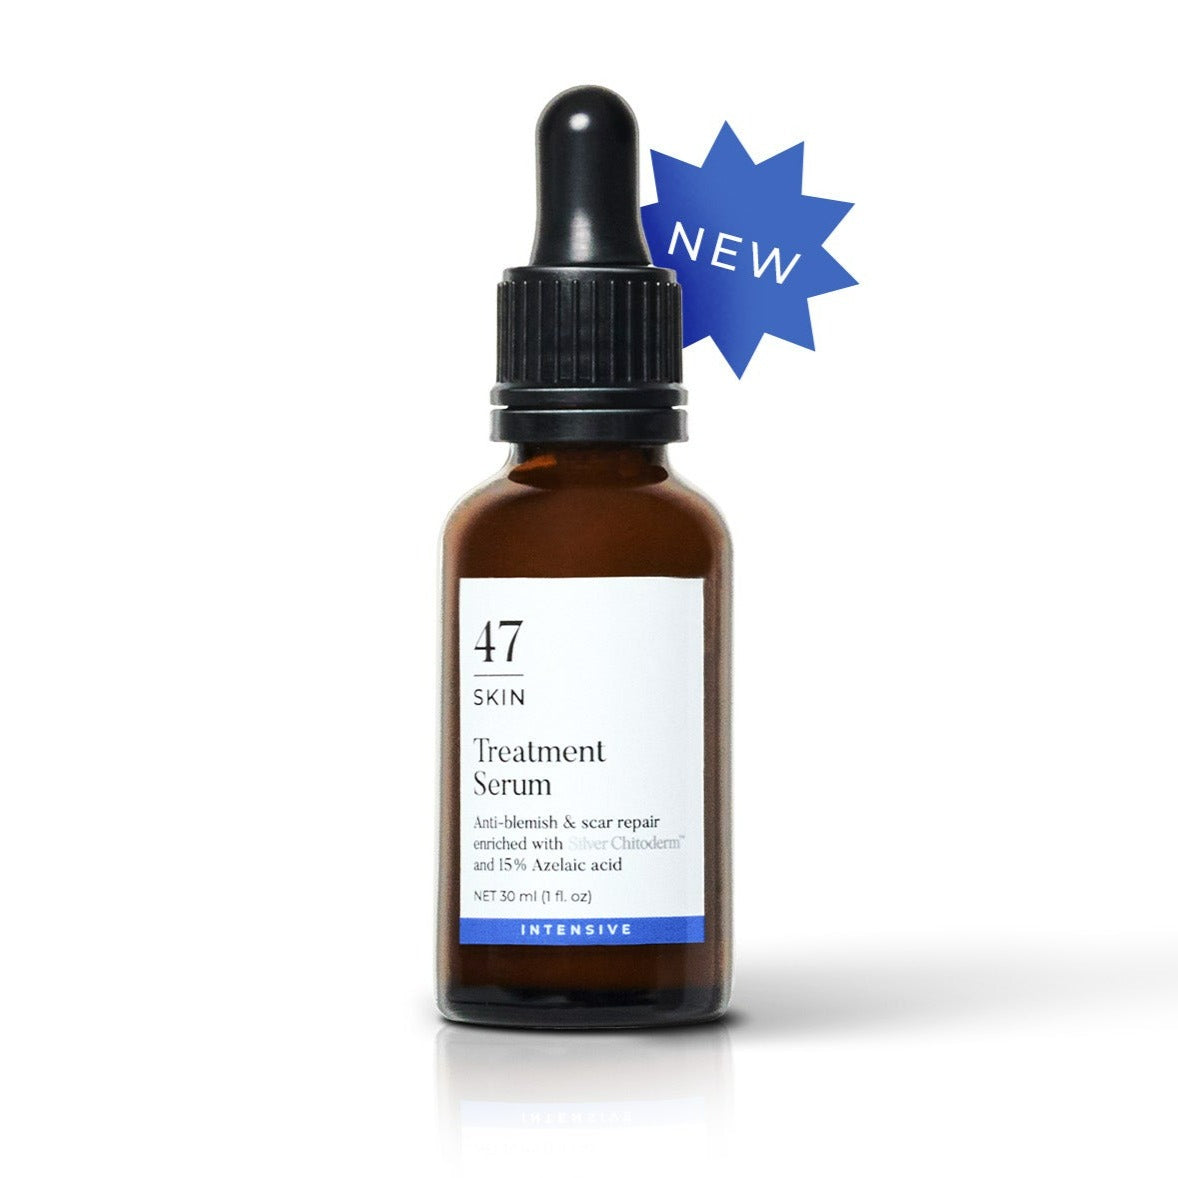 Treatment serum for persistent, stubborn and cystic acne